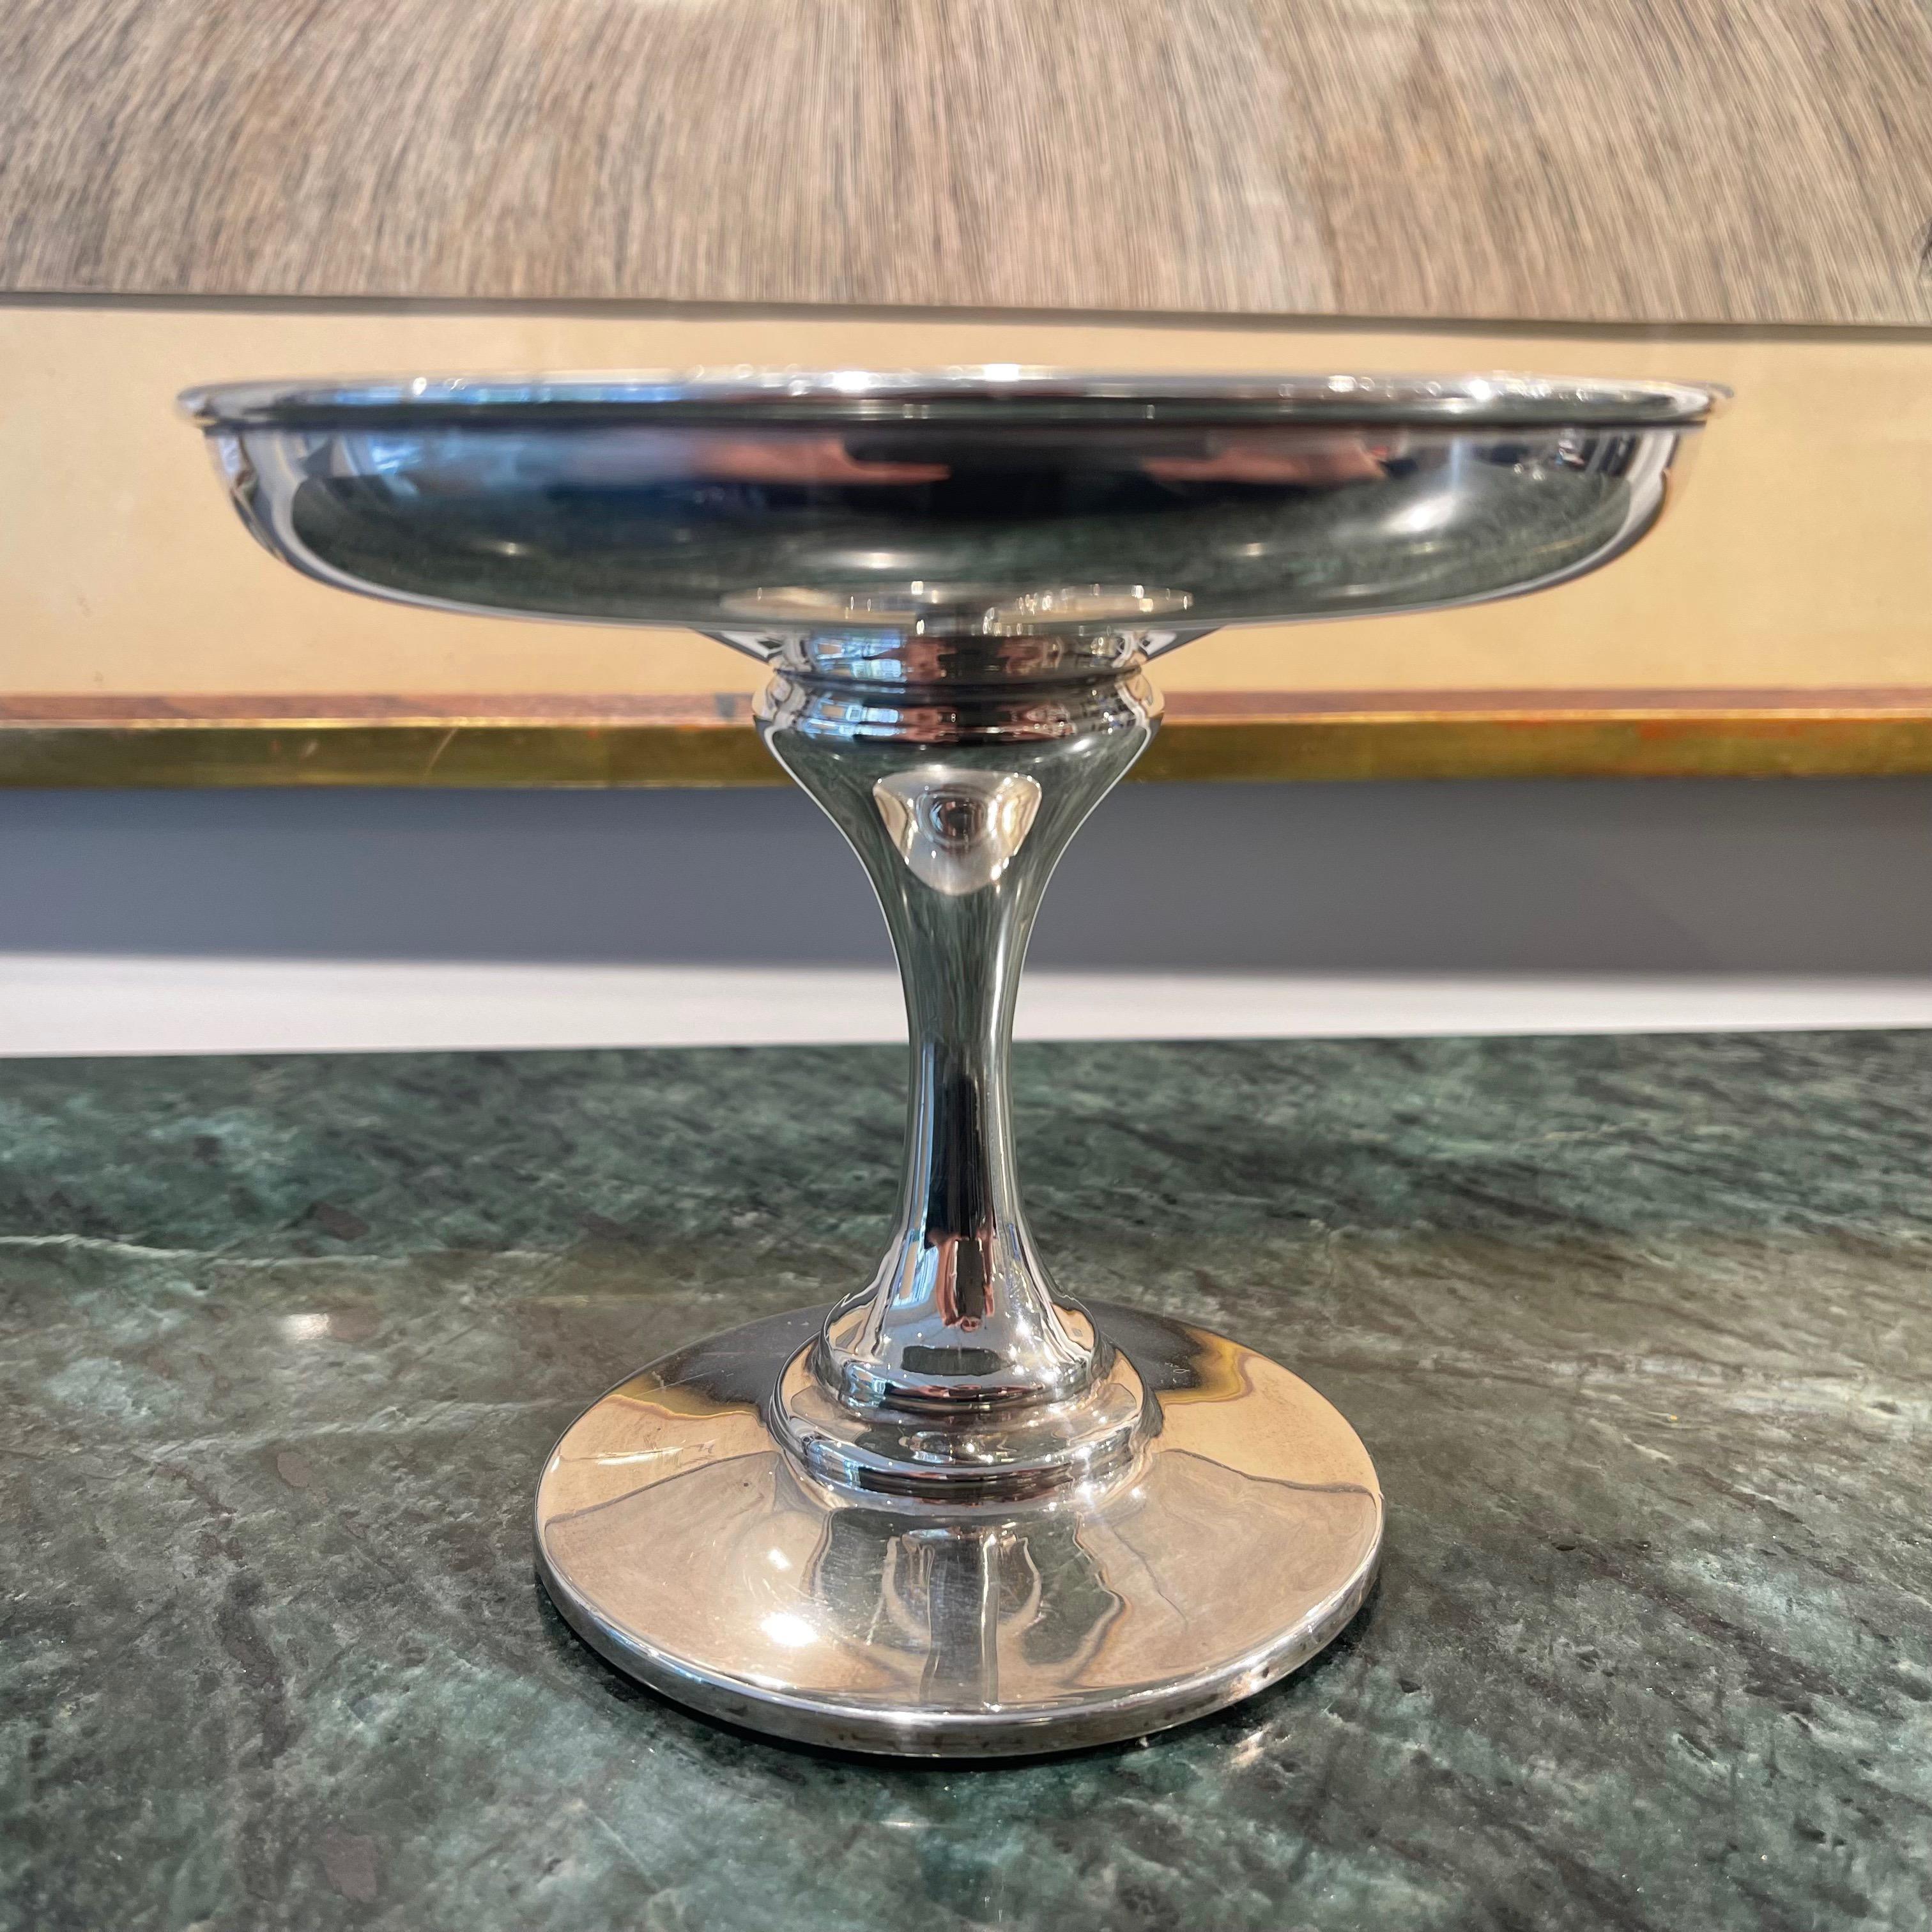 A medium-sized, solid sterling silver centrepiece stand with an elegant pedestal base that upholds an unembellished, rimmed bowl. Made by the family company of Charles Iles in Birmingham in 1921, the overall effect is a simple, classical form for a